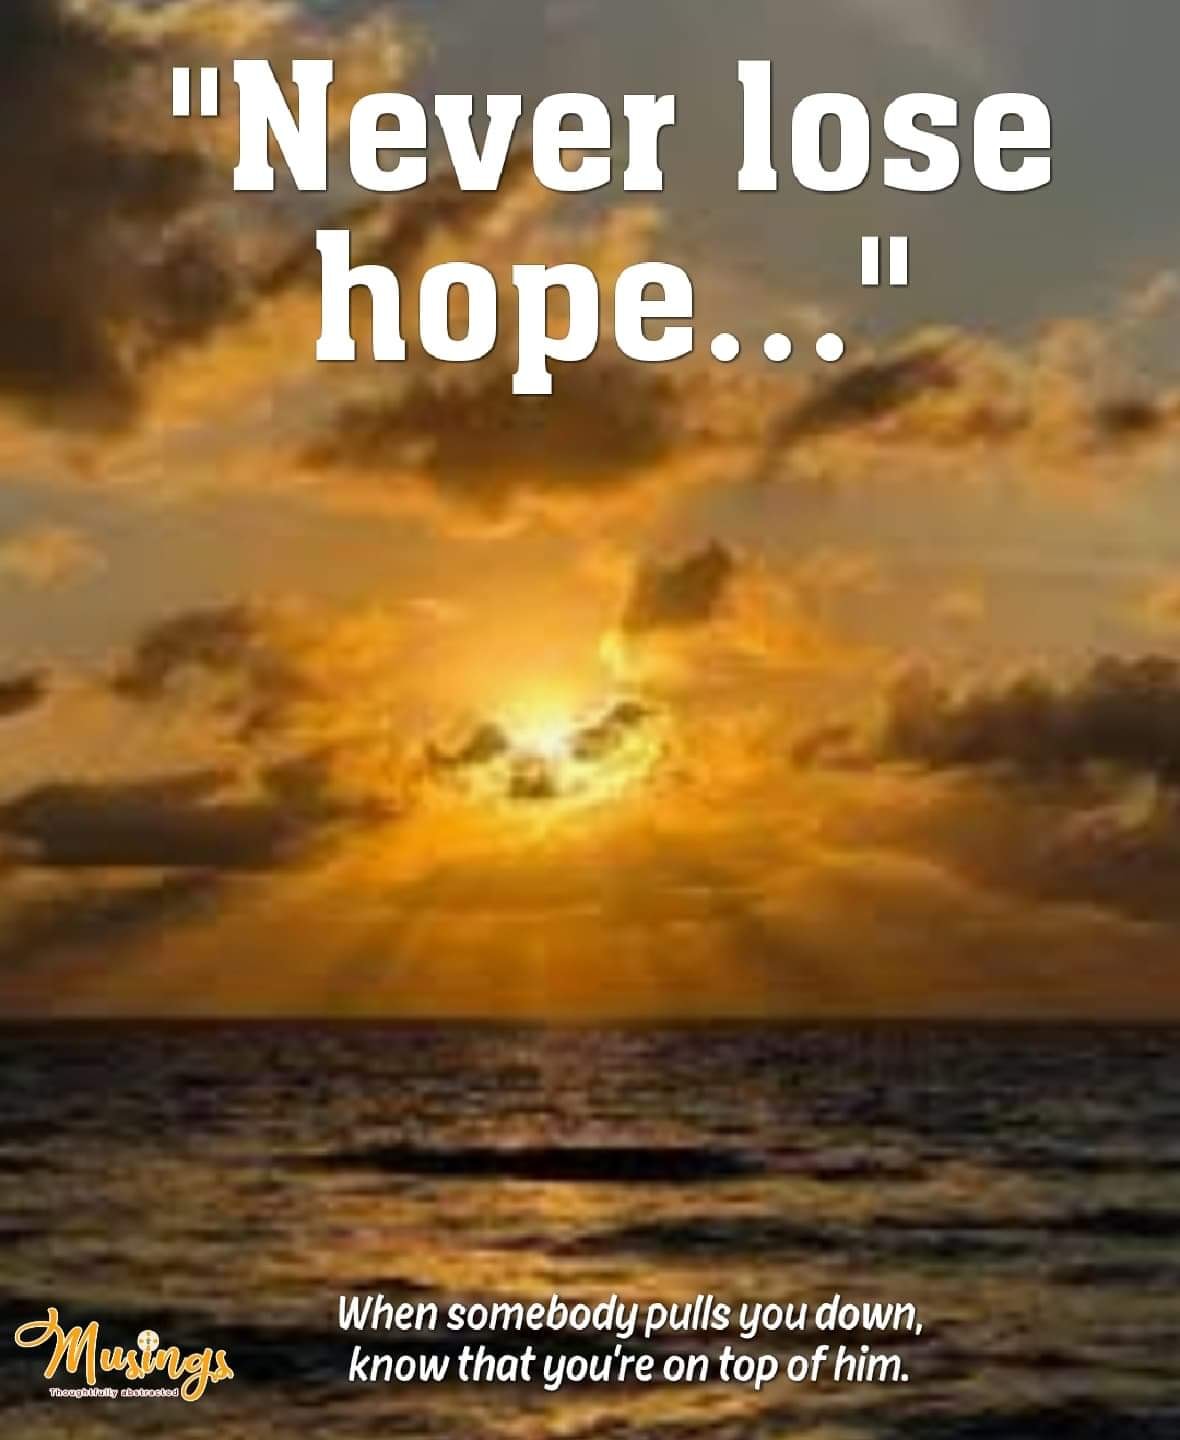 "Never lose hope..."